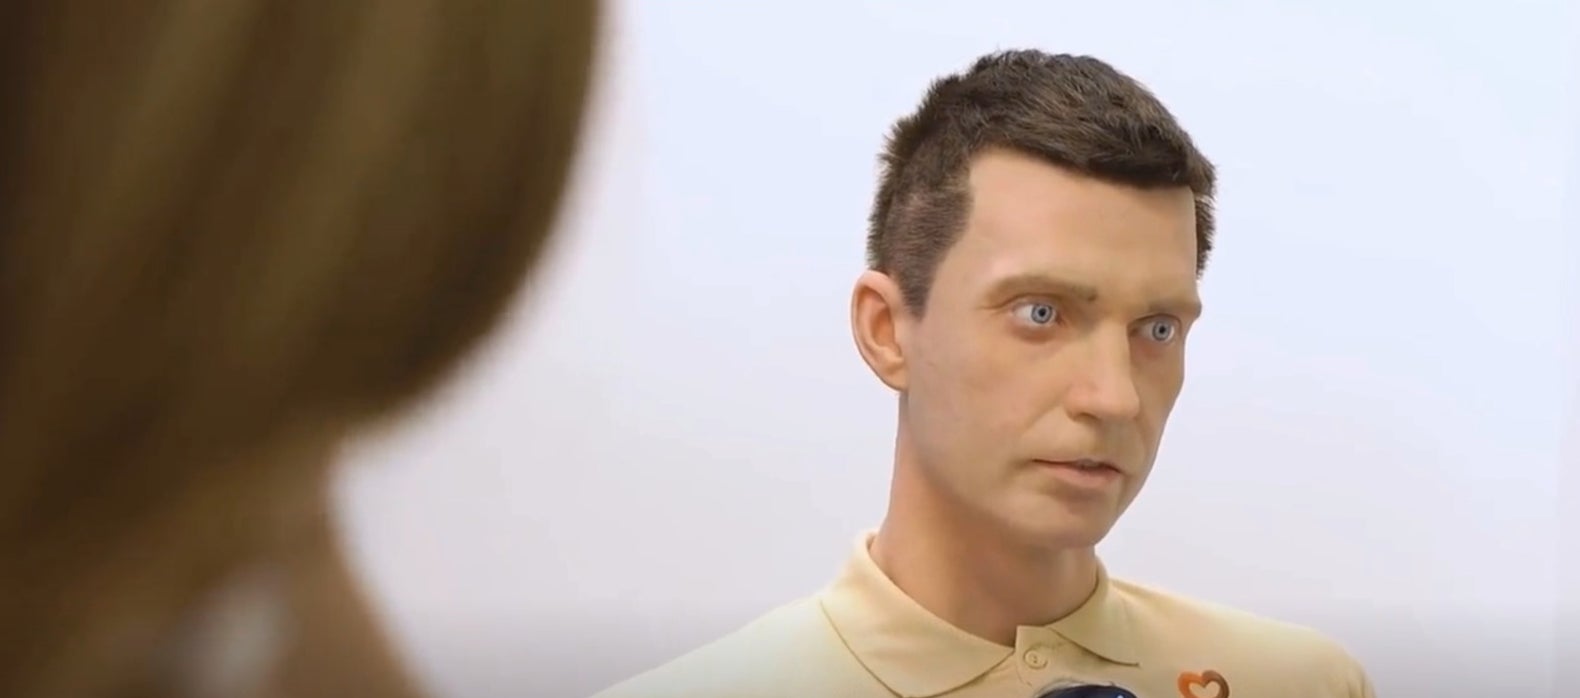 You can get paid 150,000 for letting a robot use your face and voice | indy100